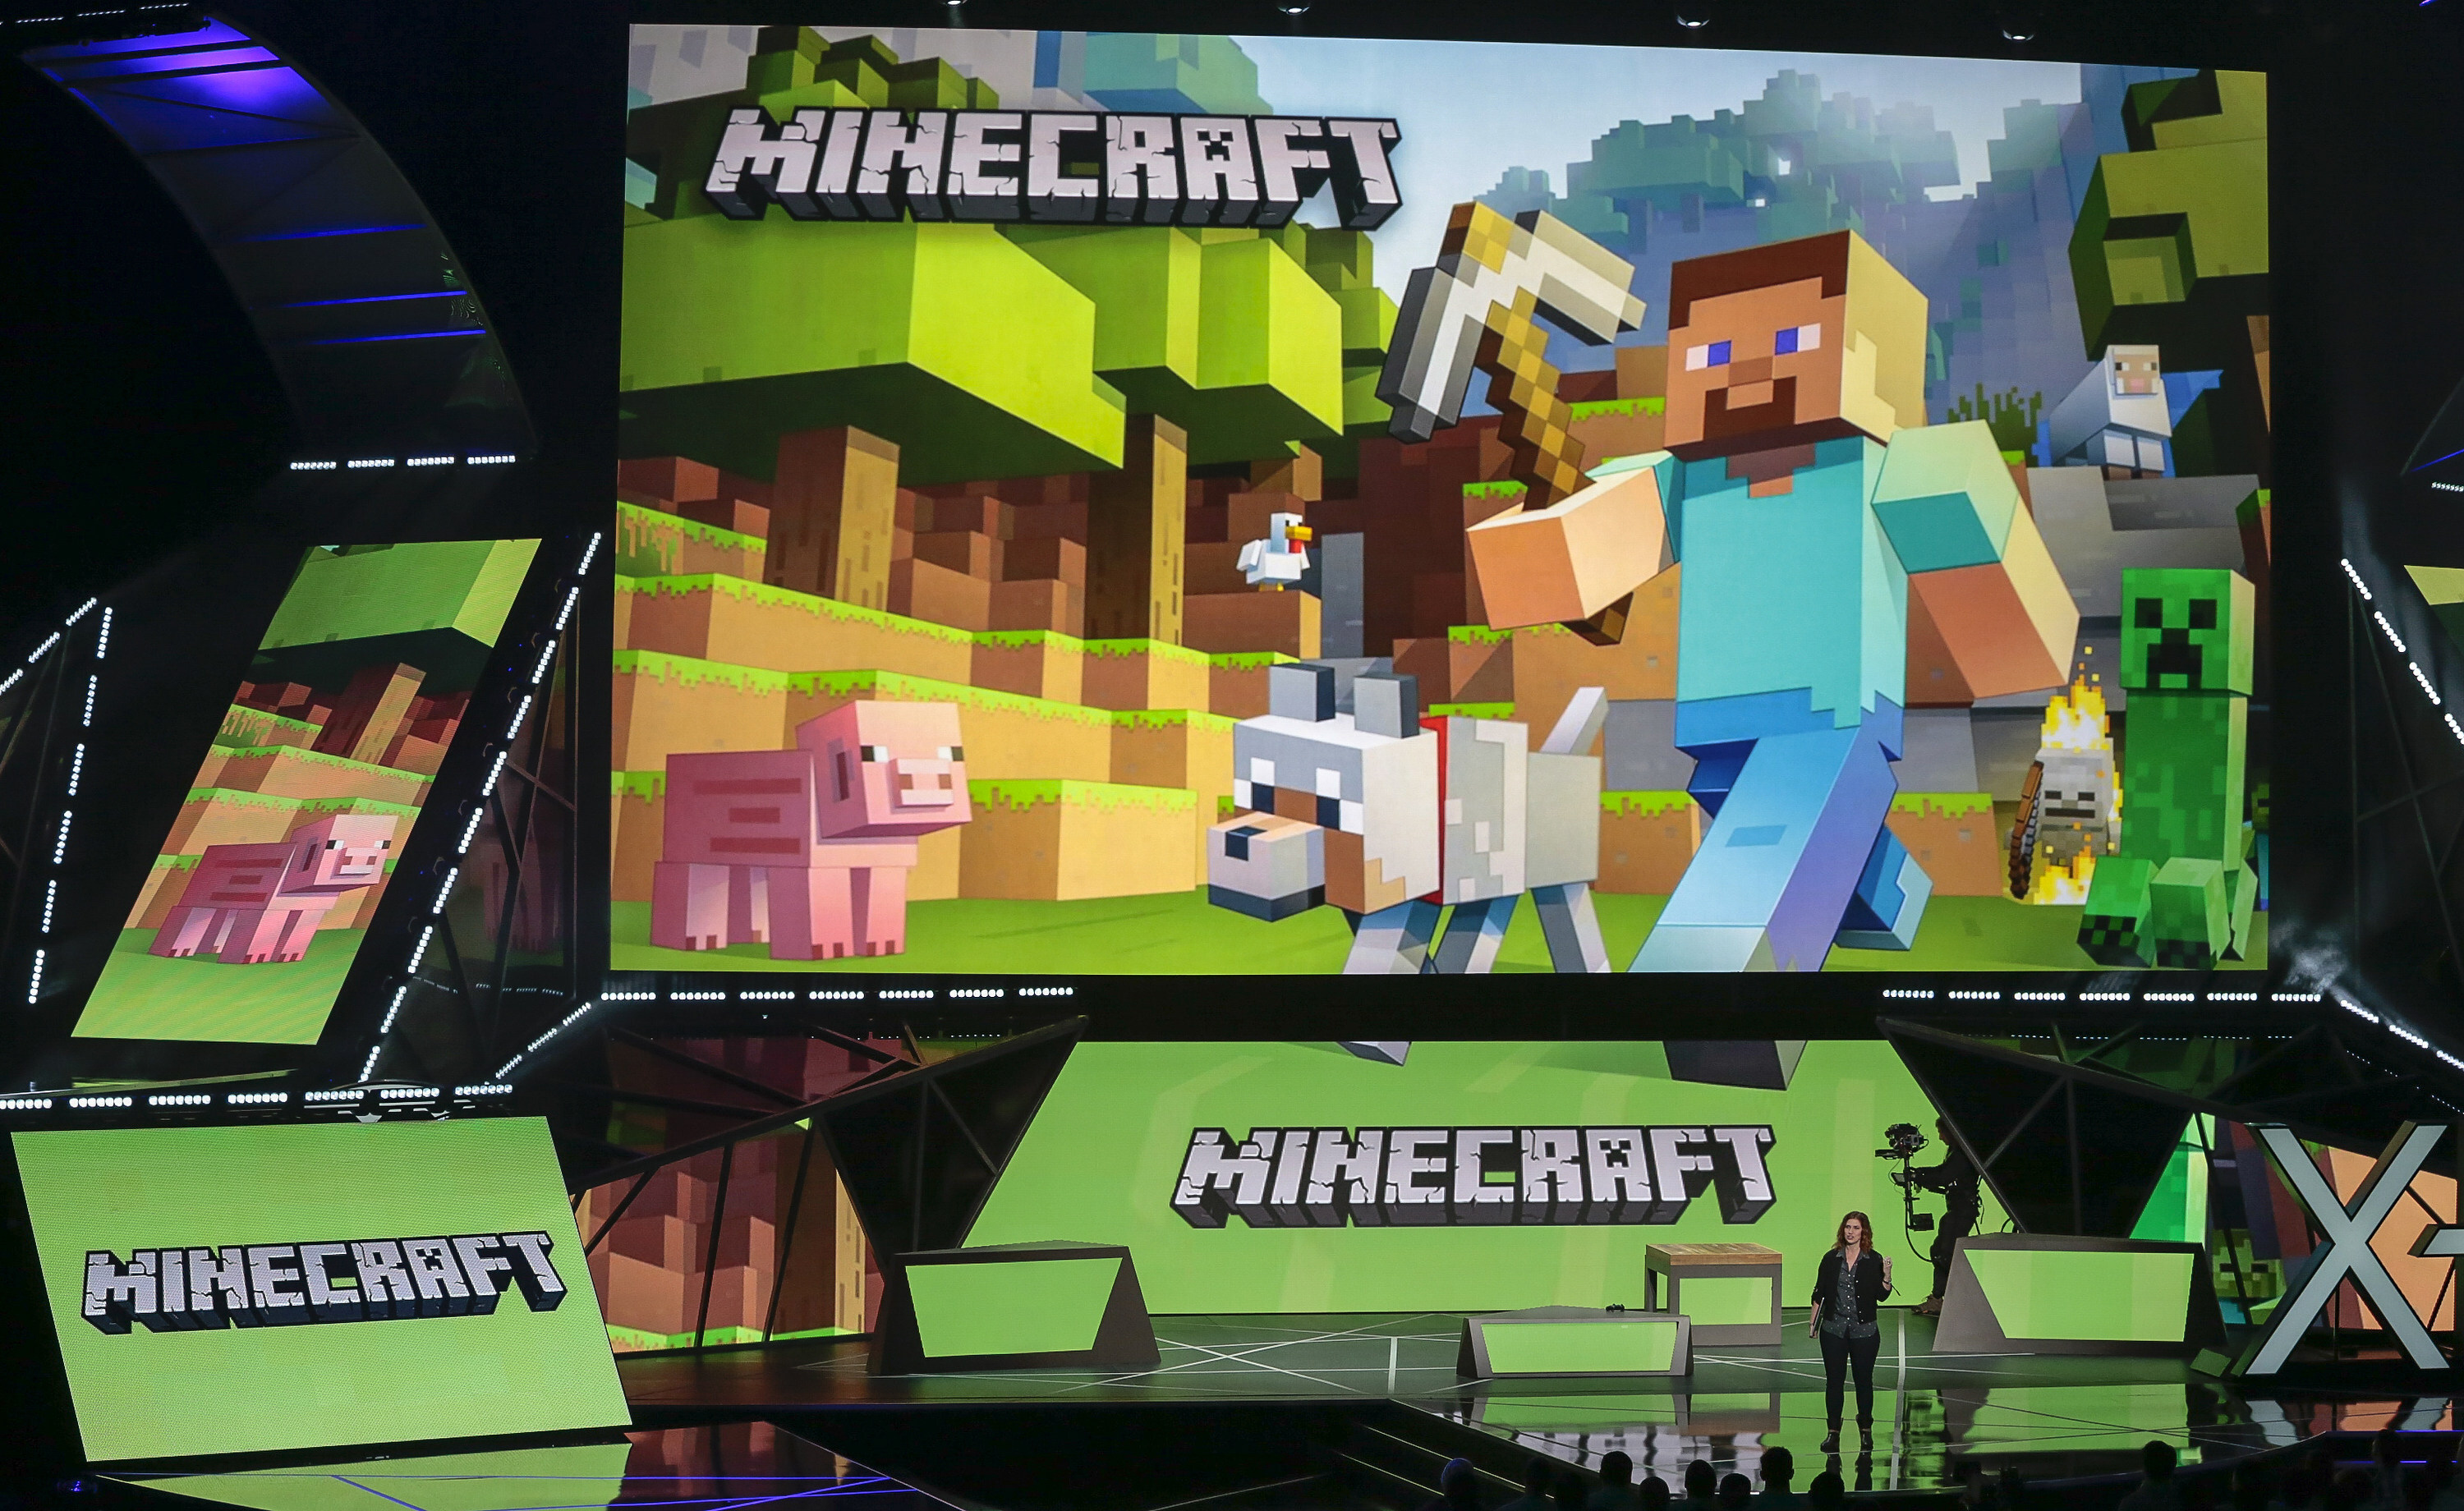 The first obvious signs of the flaw’s exploitation appeared in Minecraft, an online game hugely popular with kids and owned by Microsoft. Photo: AP